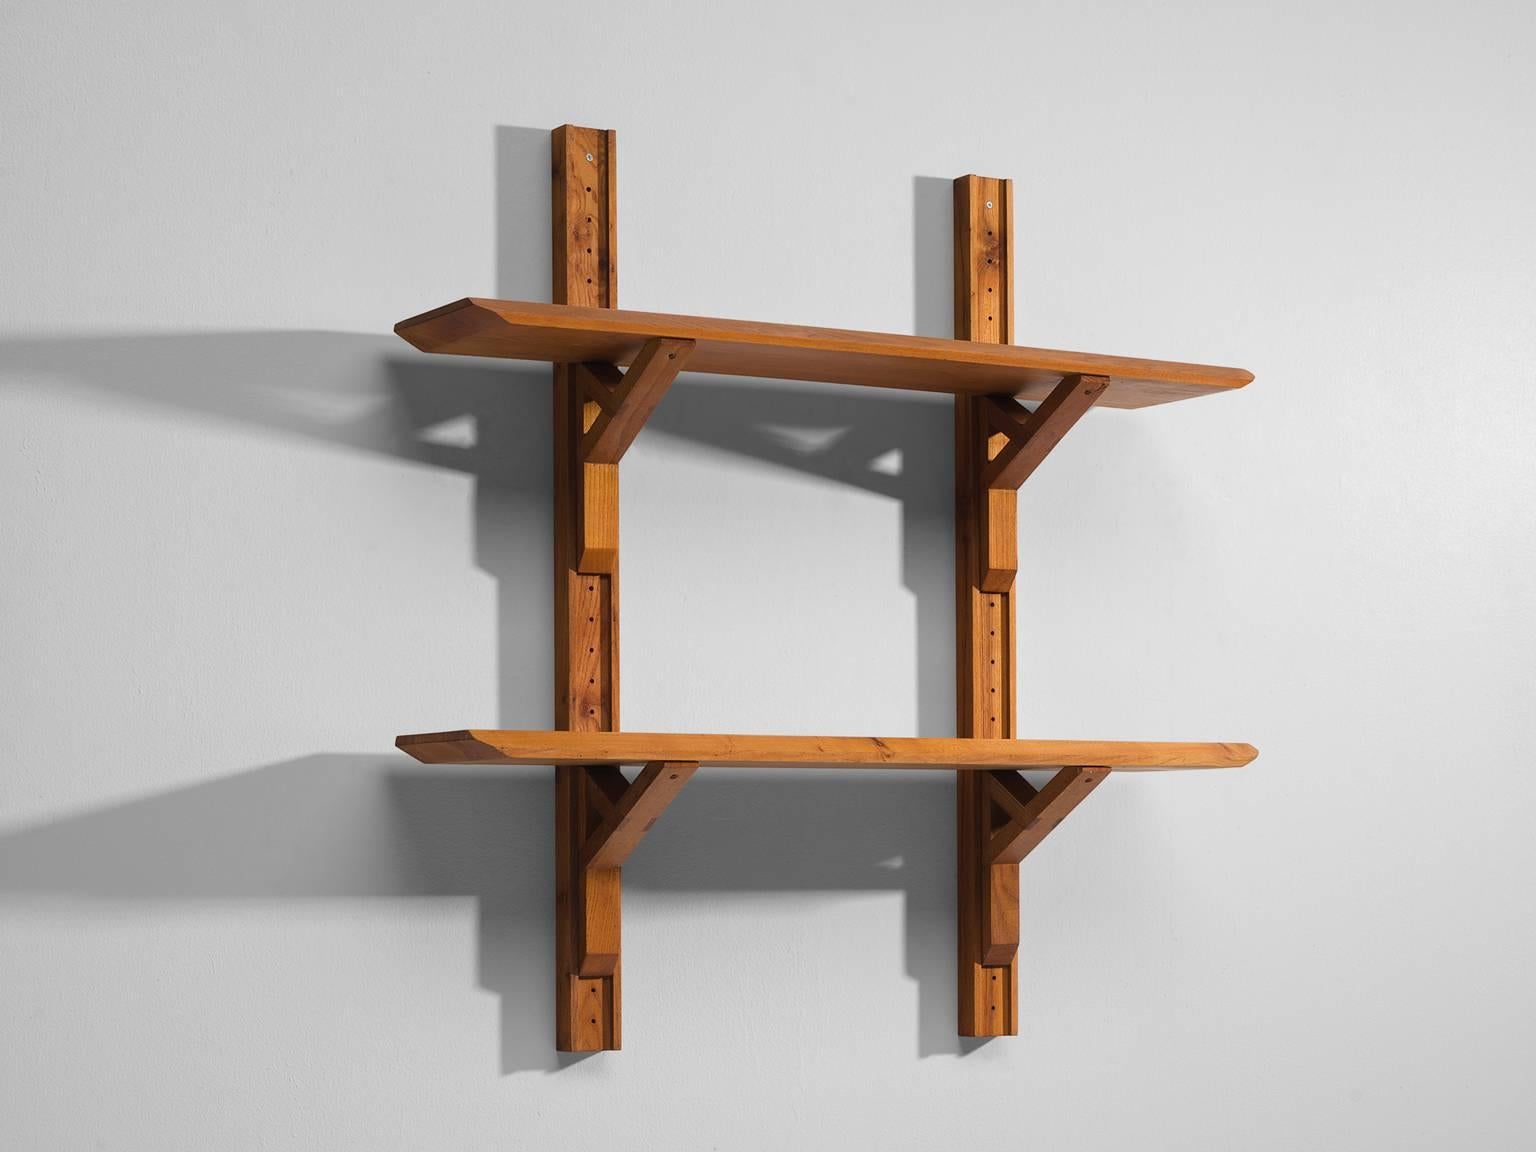 Pierre Chapo, Bibliotheque, model no. B30, elm, France, 1960s.

Model 'B30-bibliotheque' is designed by Pierre Chapo. This clear and solid bookcase consist of two robust elm shelves that rest upon two T-shaped brackets. The bookshelves are in the